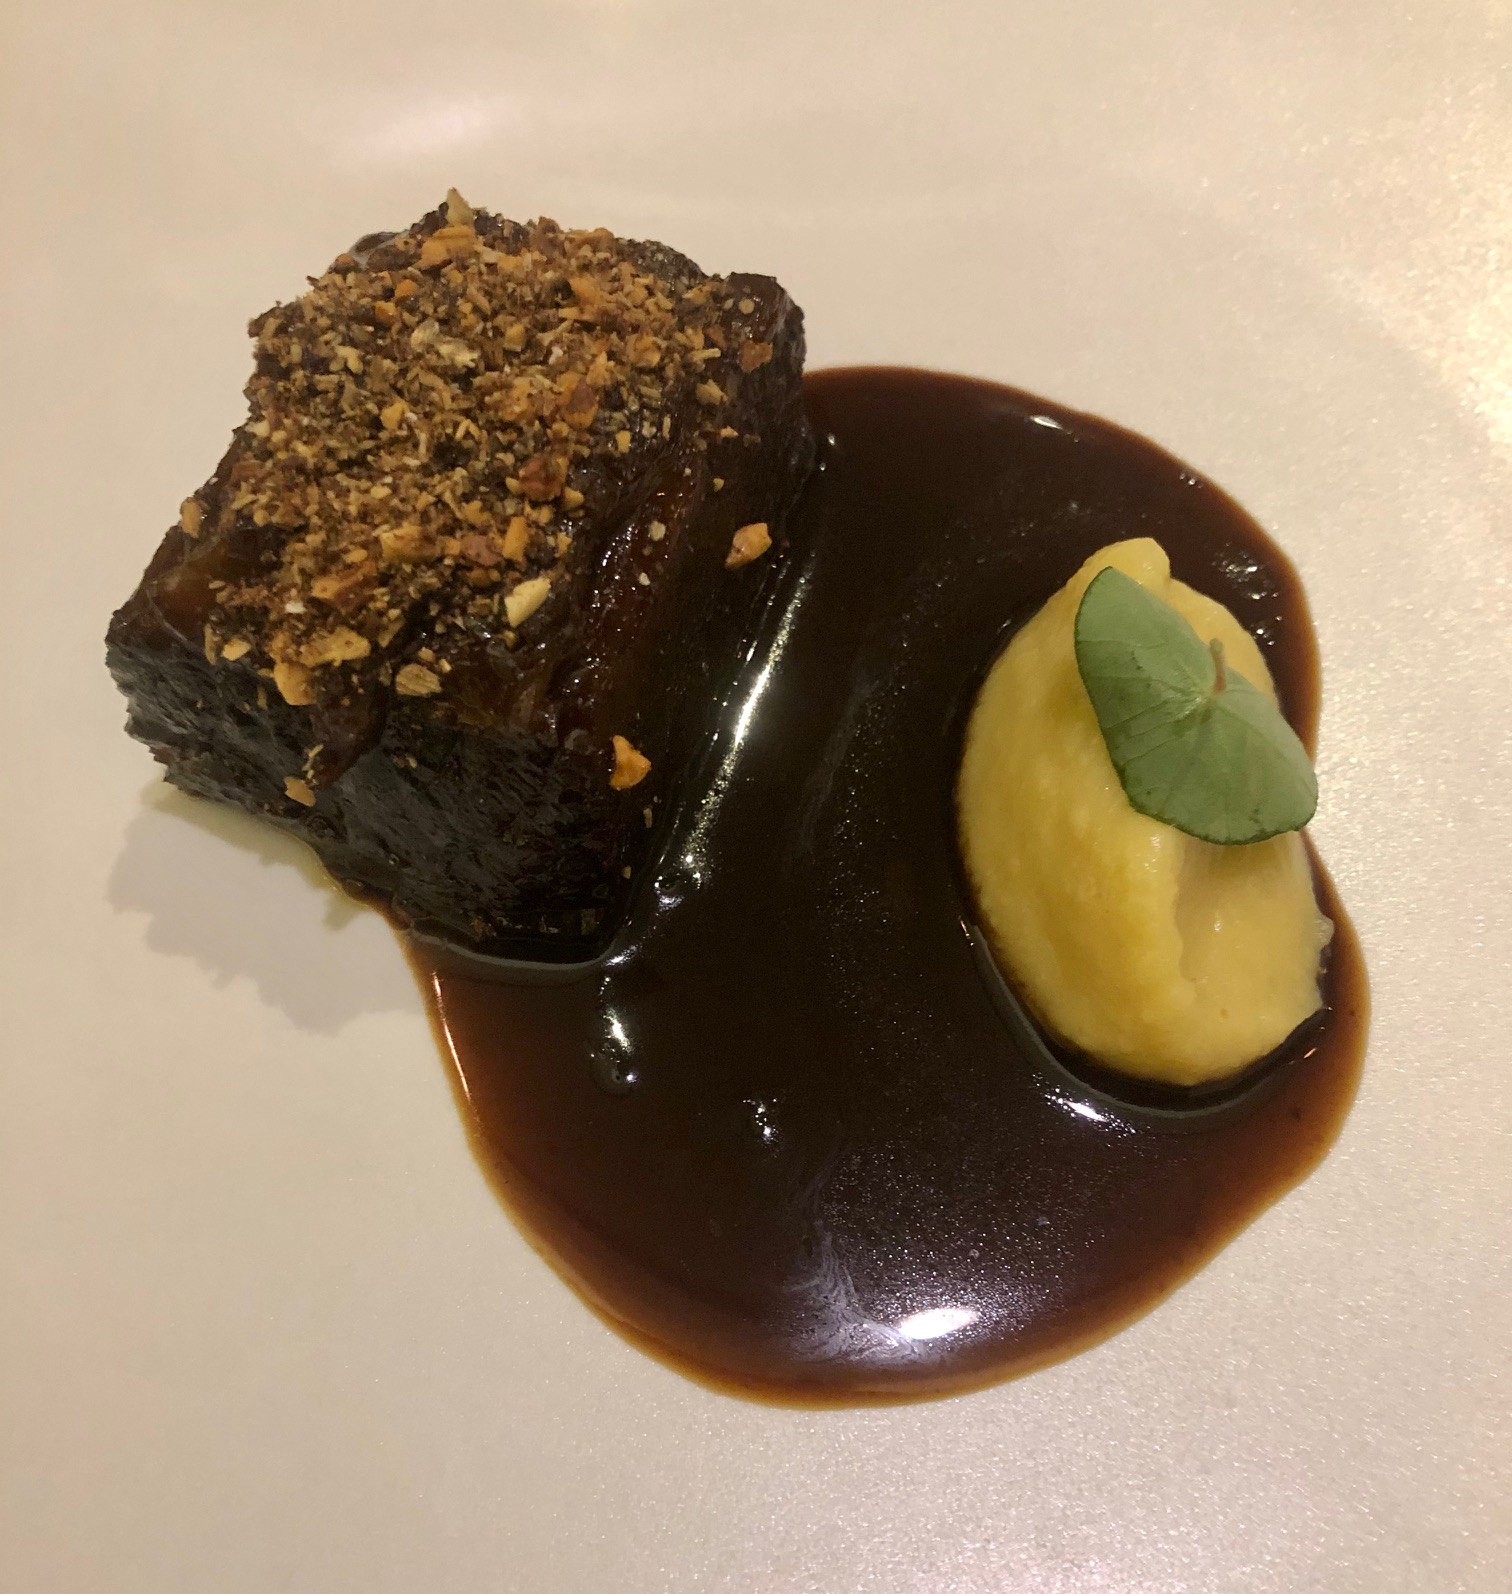 Frilu – An equisite tasting menu that’s worth the trip to Thornhill